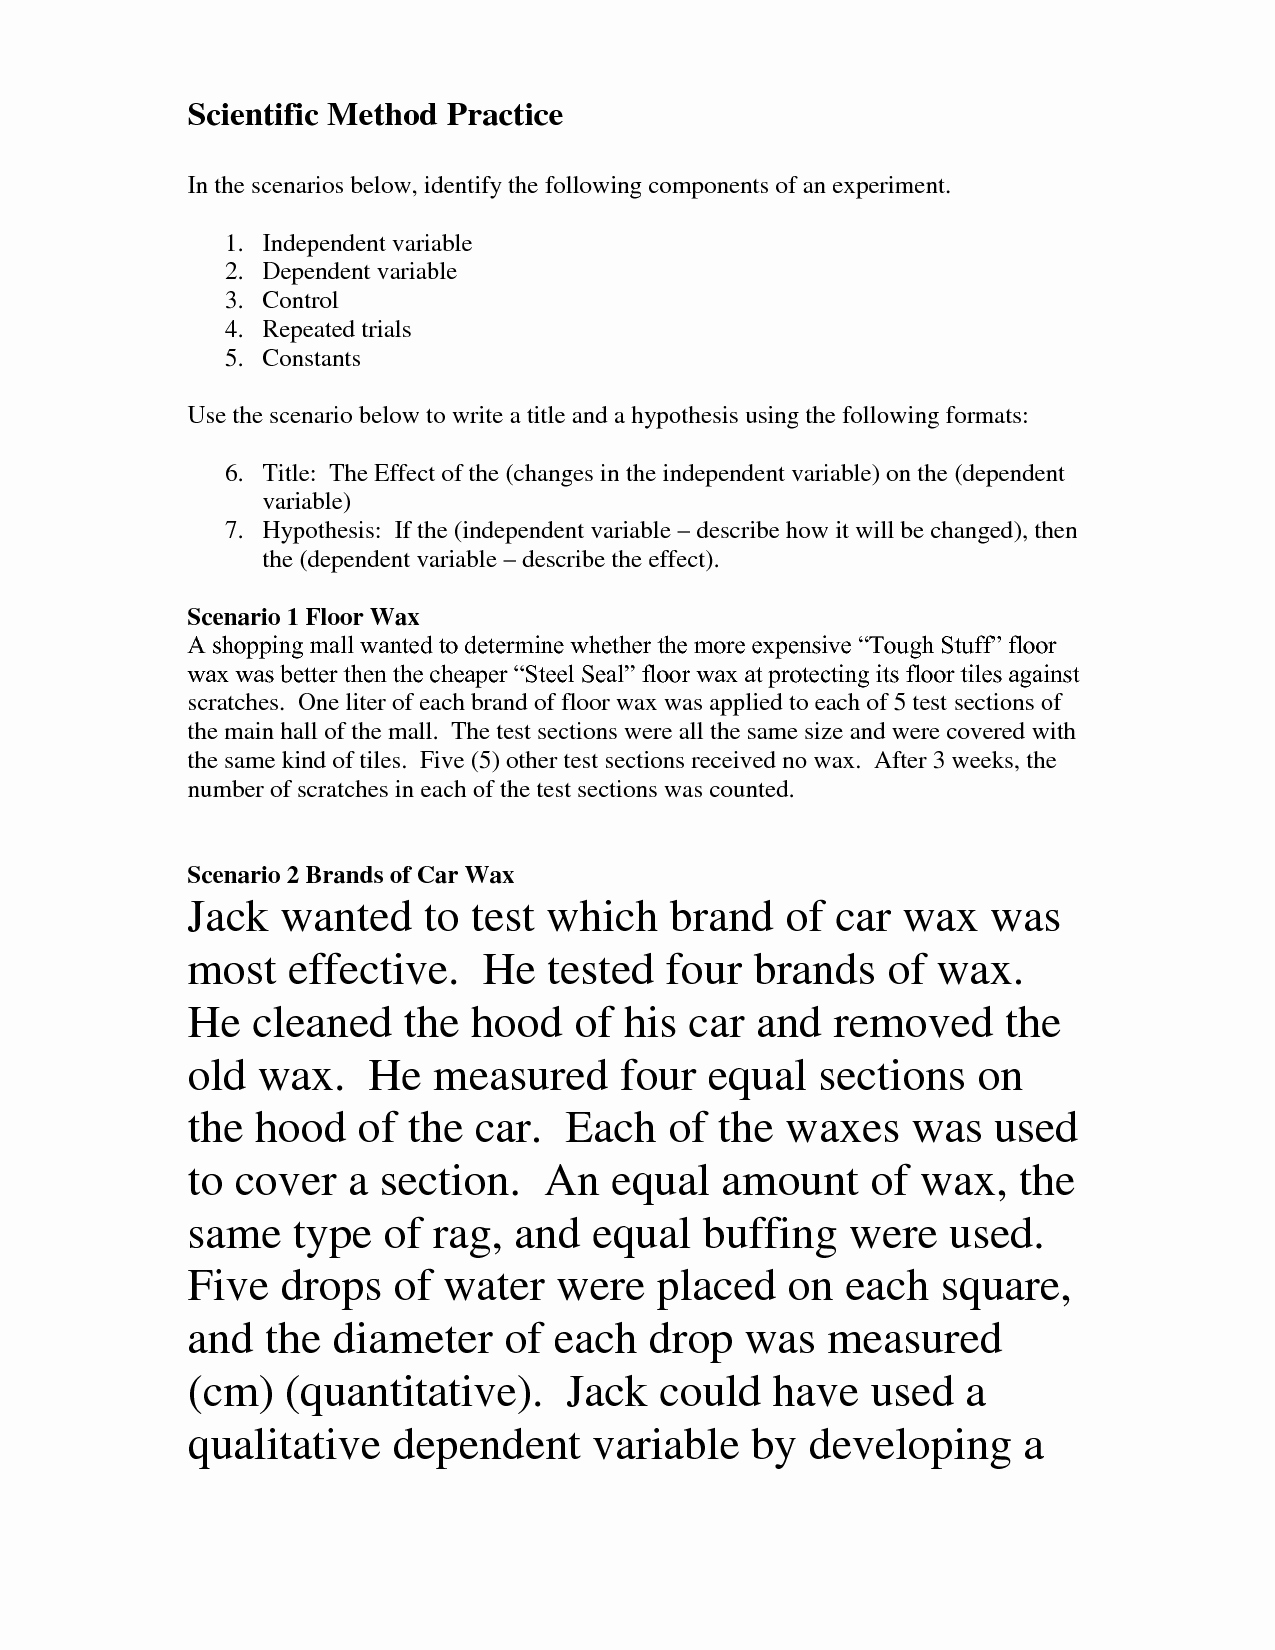 Scientific Method Worksheet Middle School Inspirational How to Write A Hypothesis for 5th Grade